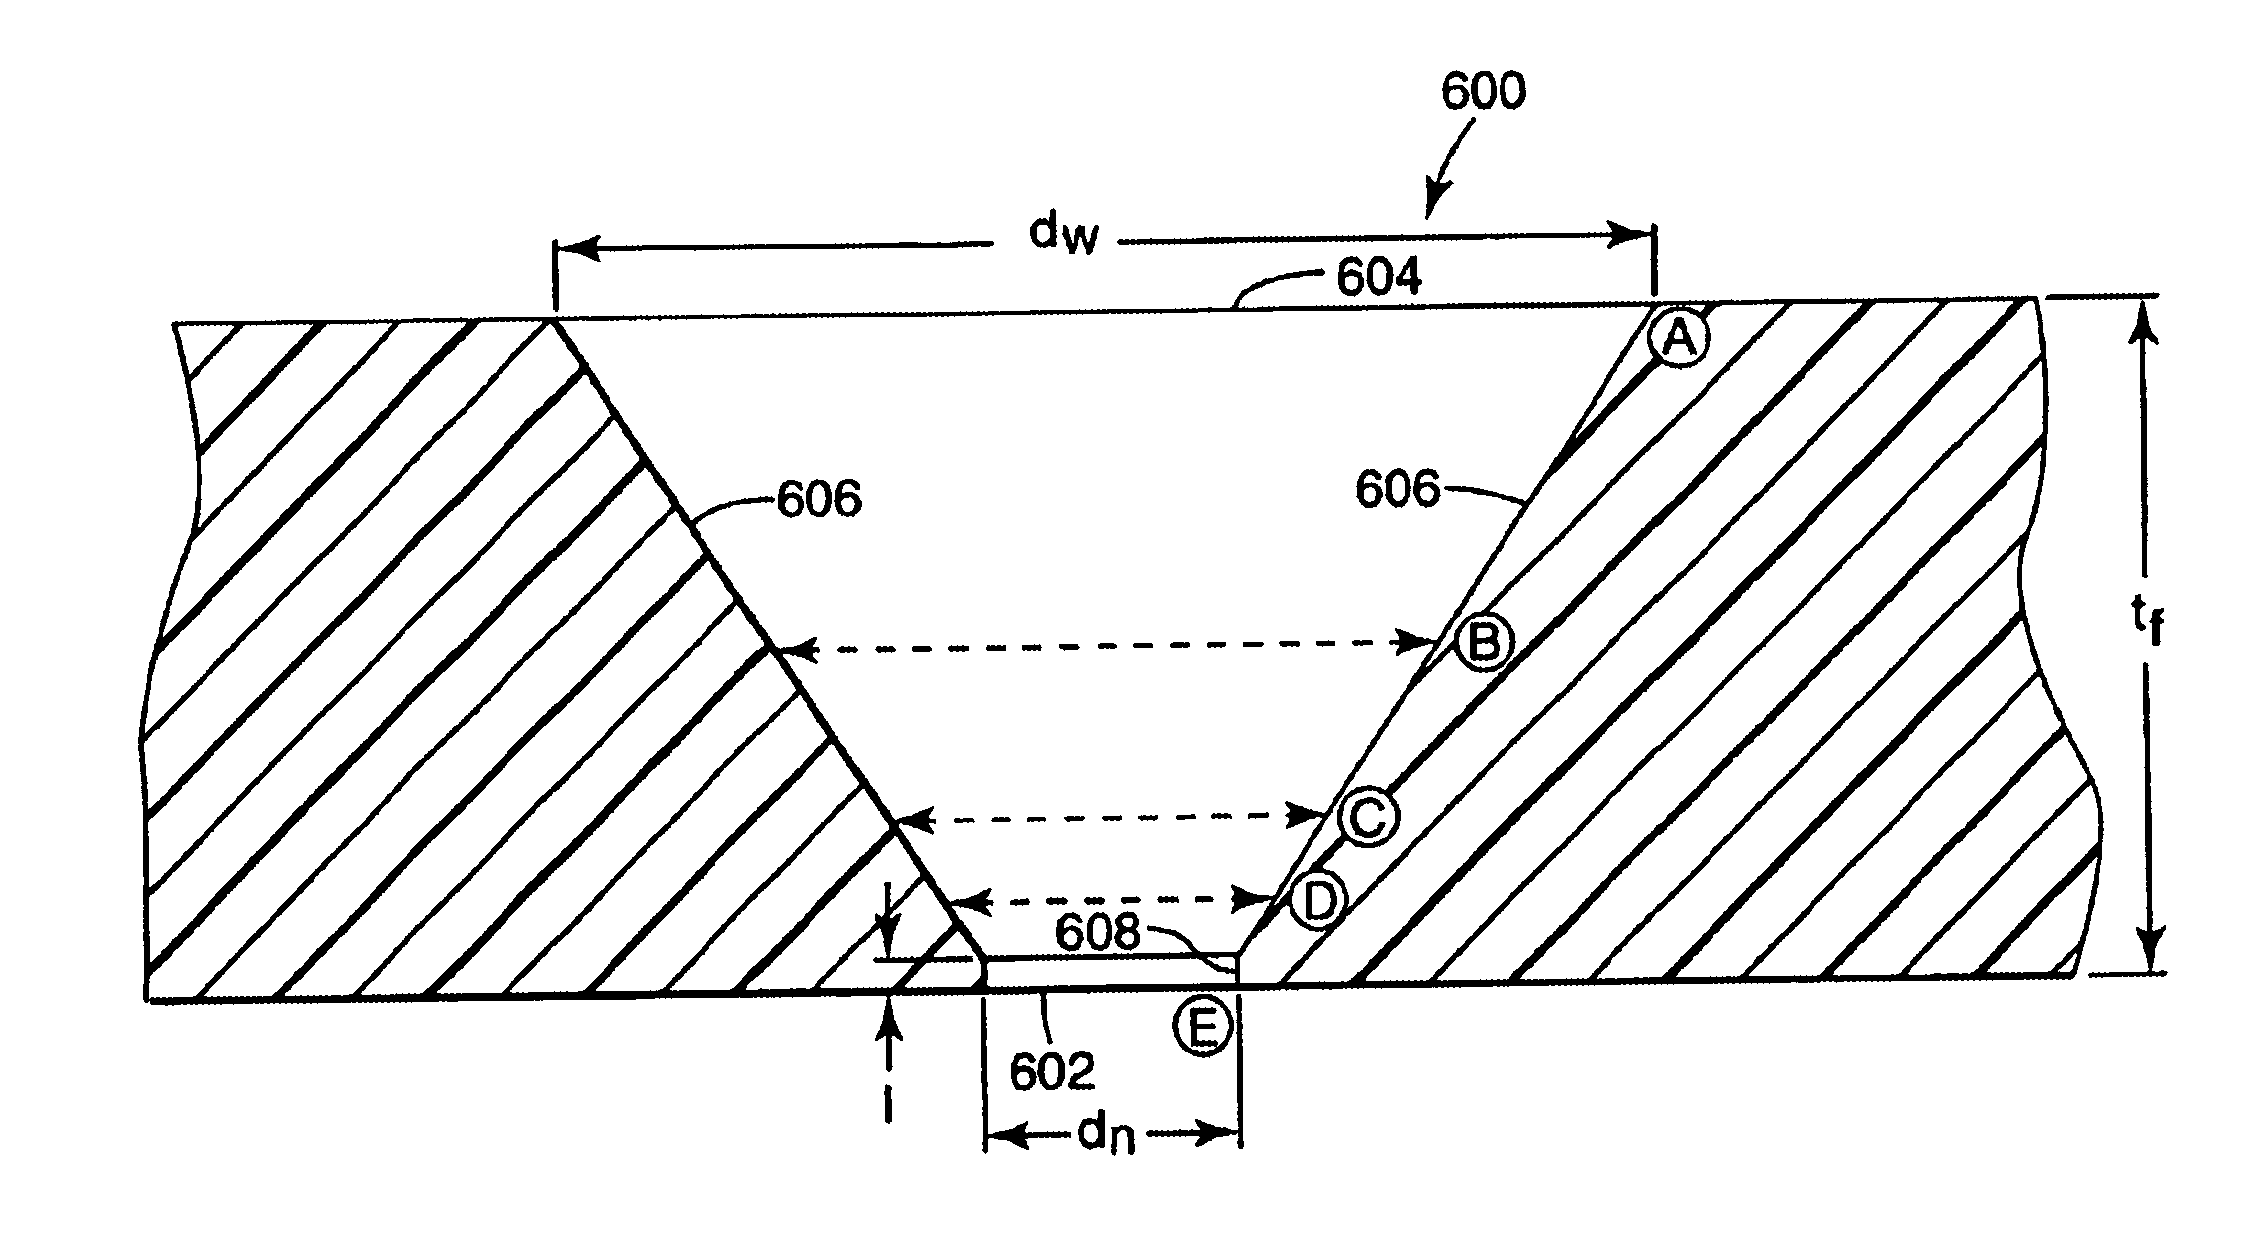 Microperforated polymeric film for sound absorption and sound absorber using same